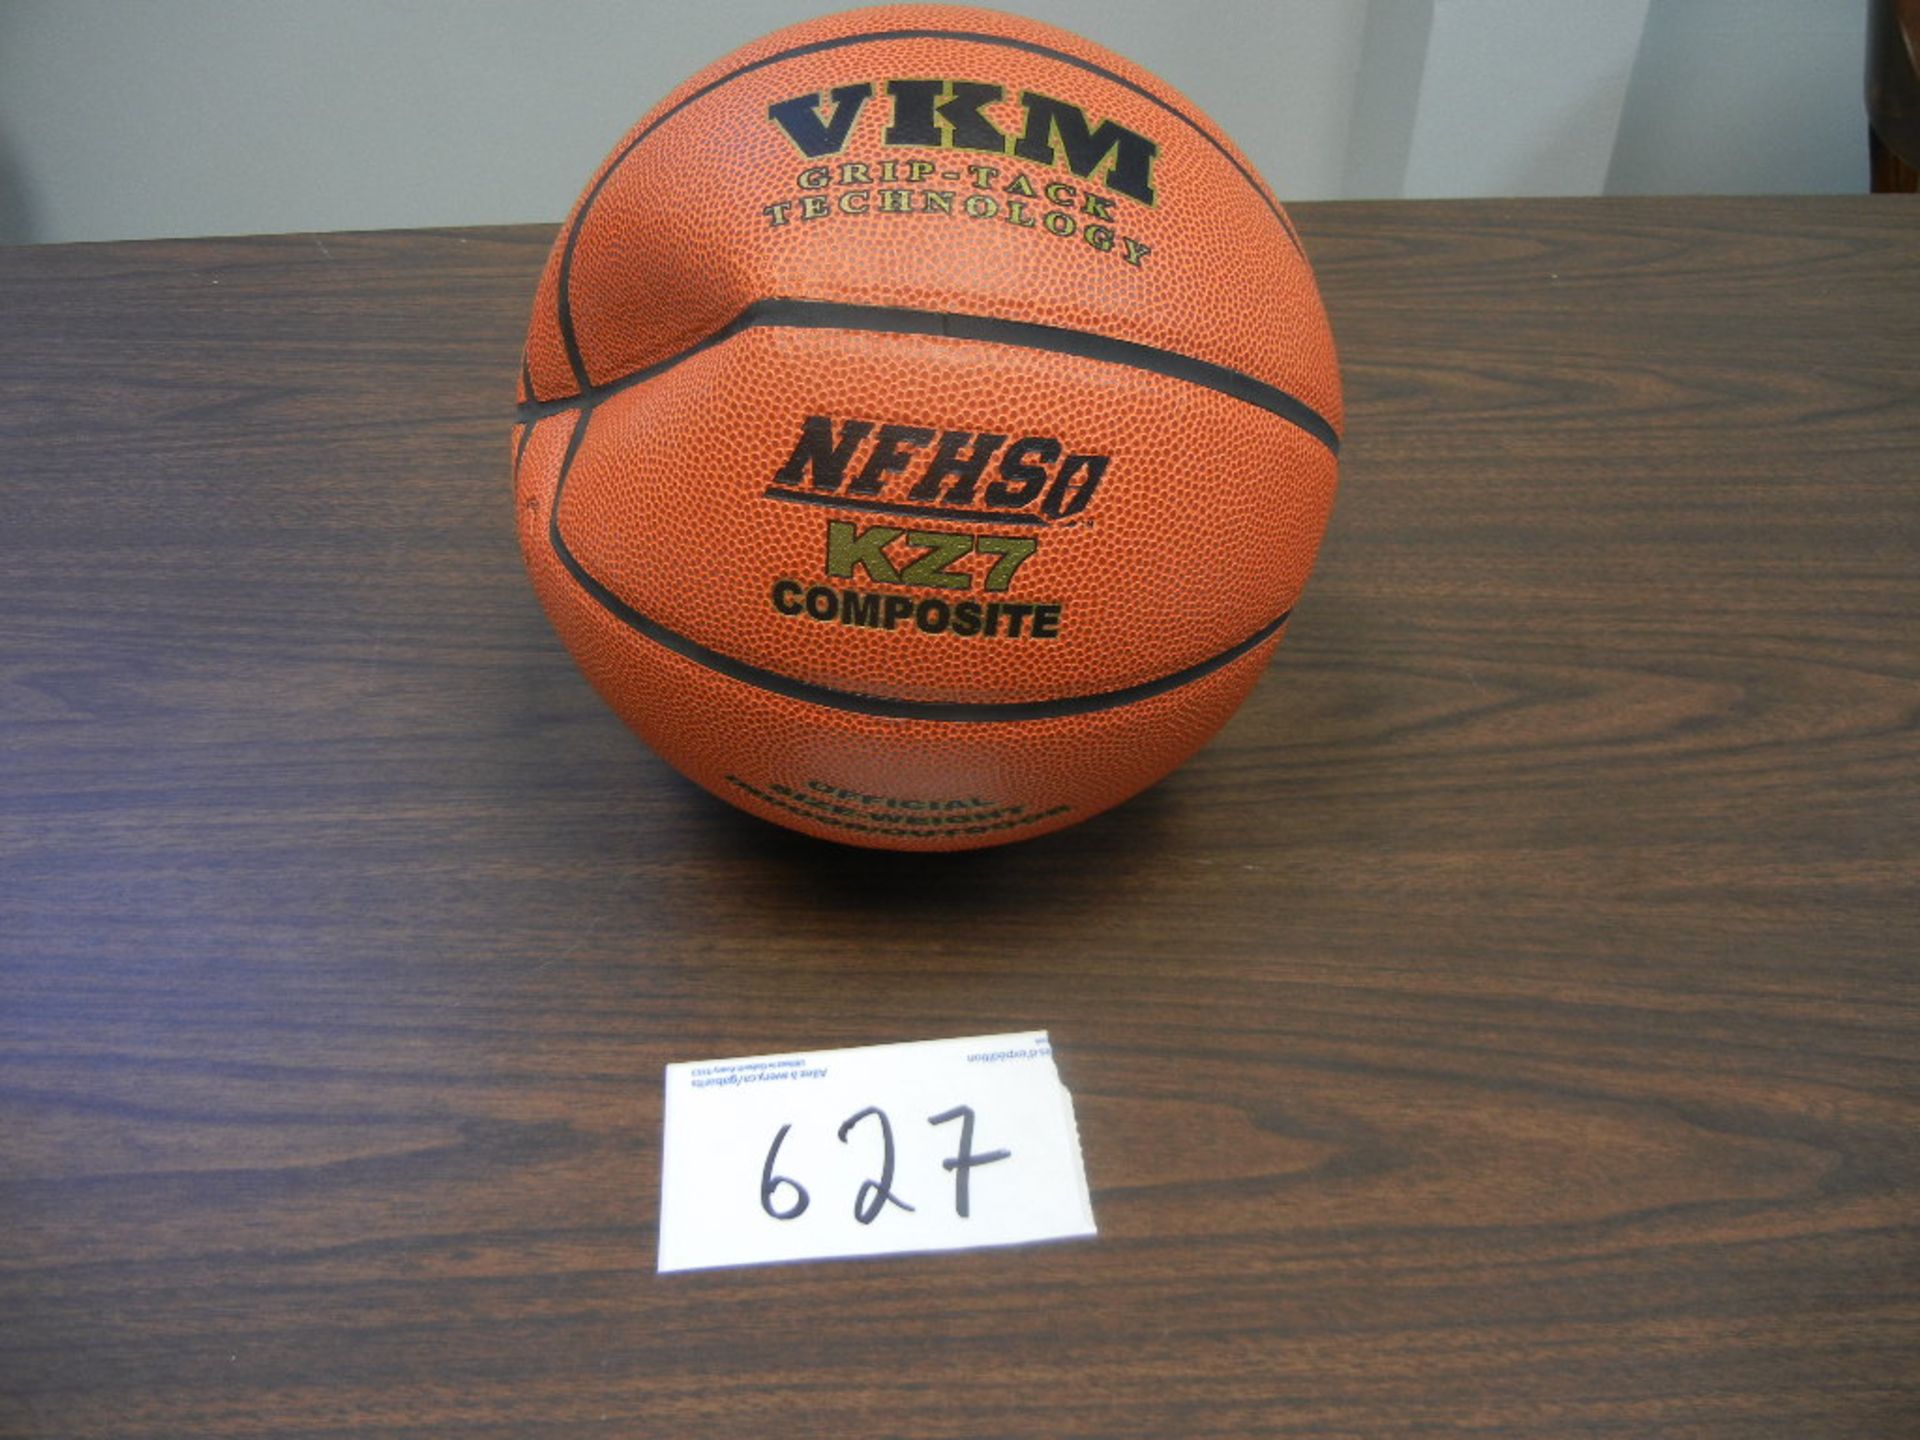 Premium Tacky Composite Leather,NFHS Specs. International Full Size 7 Wide Channel Basketball VKM#